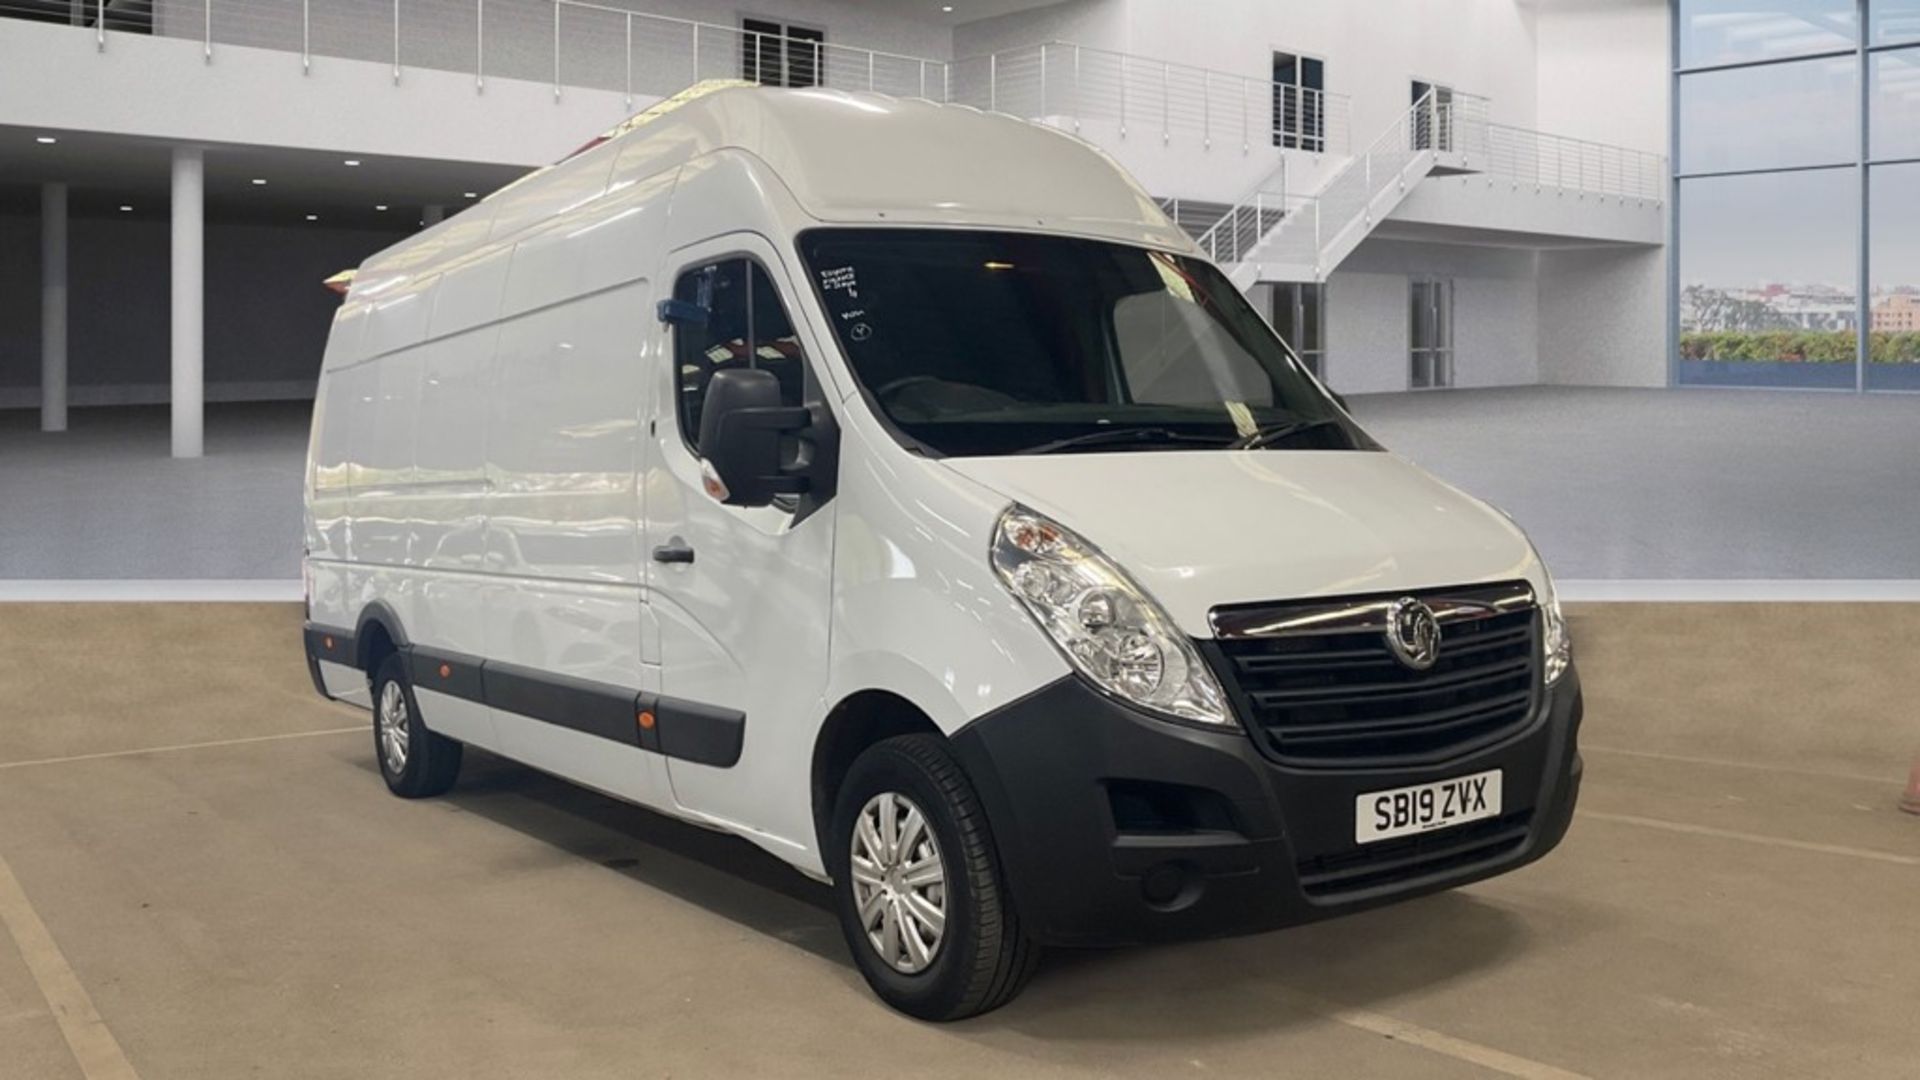 ** ON SALE ** Vauxhall Movano 3500 RWDS 2.3 CDTI 145 L4 H3 2019 '19 Reg' - Only 56,125 miles - A/C